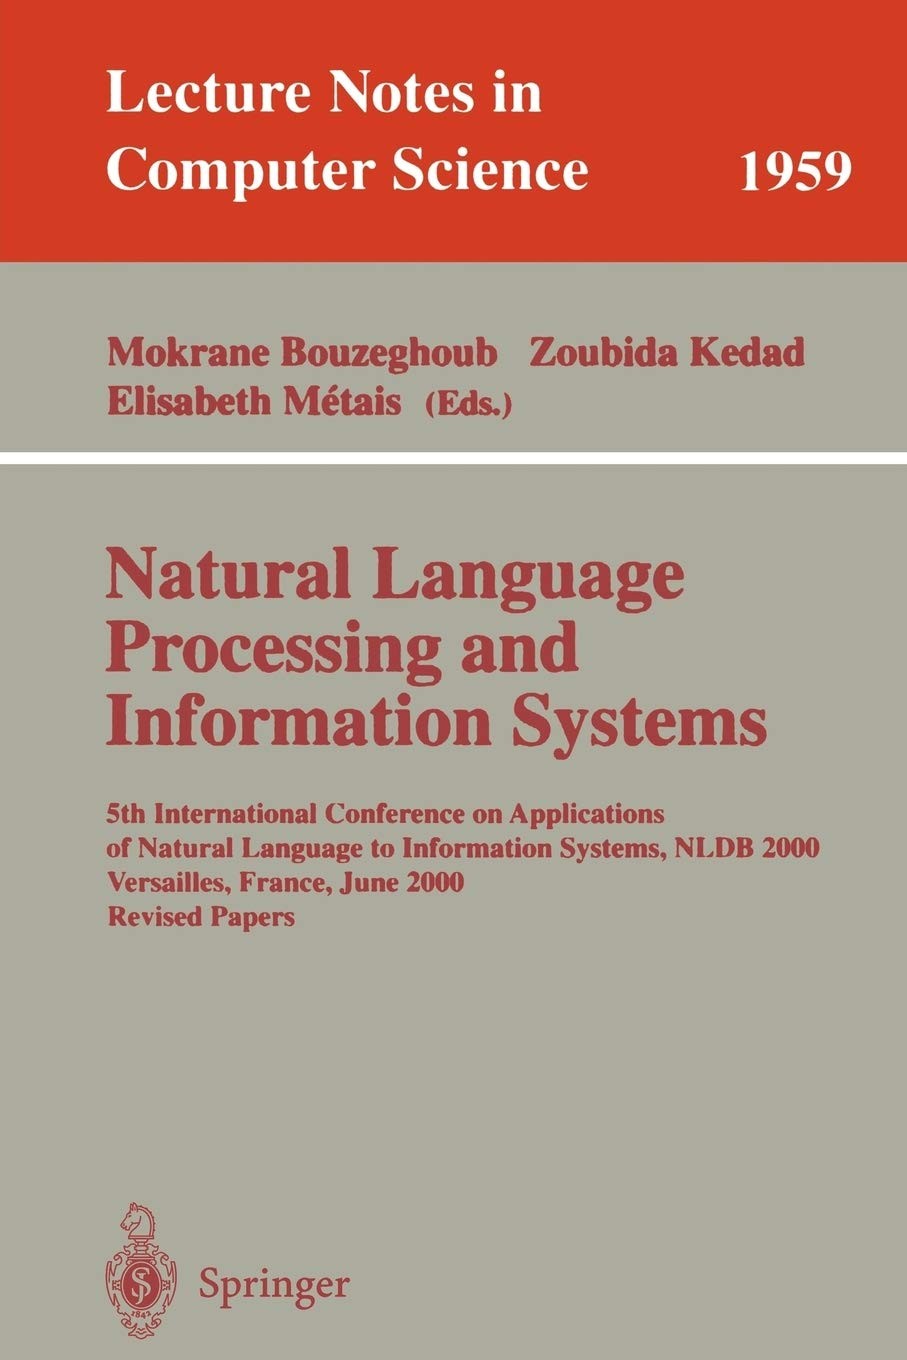 Natural Language Processing and Information Systems: 5th International Conference on Applications of Natural Language to Information Systems, NLDB 2000, Versailles, France, June 28-30, 2000; Revised Papers